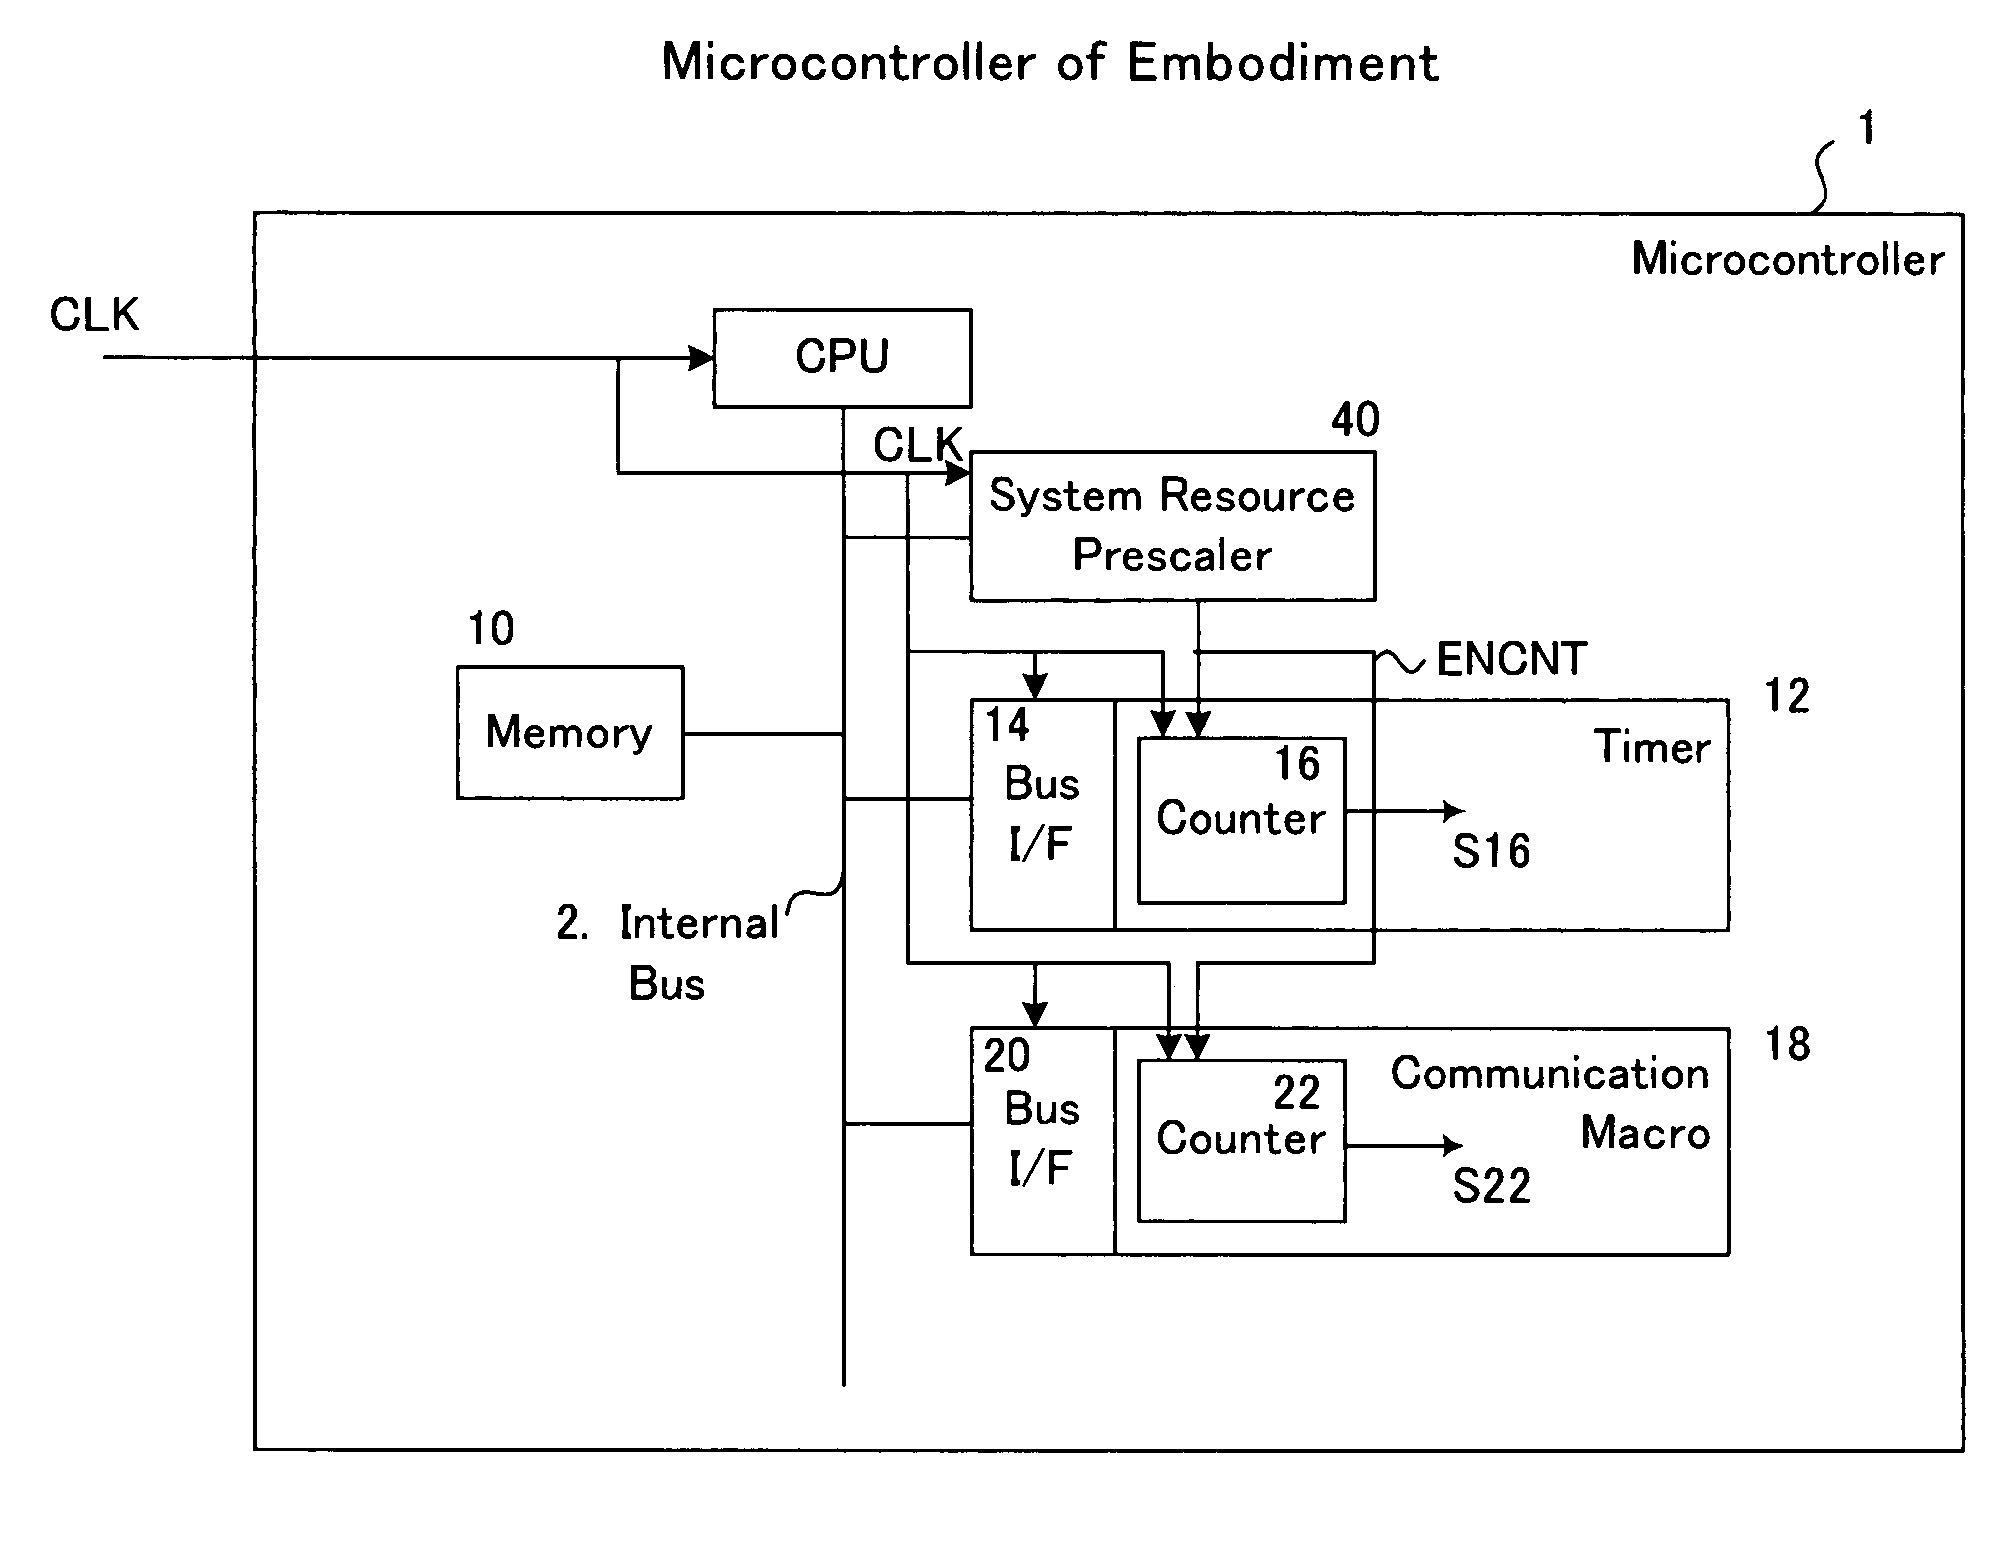 Microcontroller havng a system resource prescaler thereon